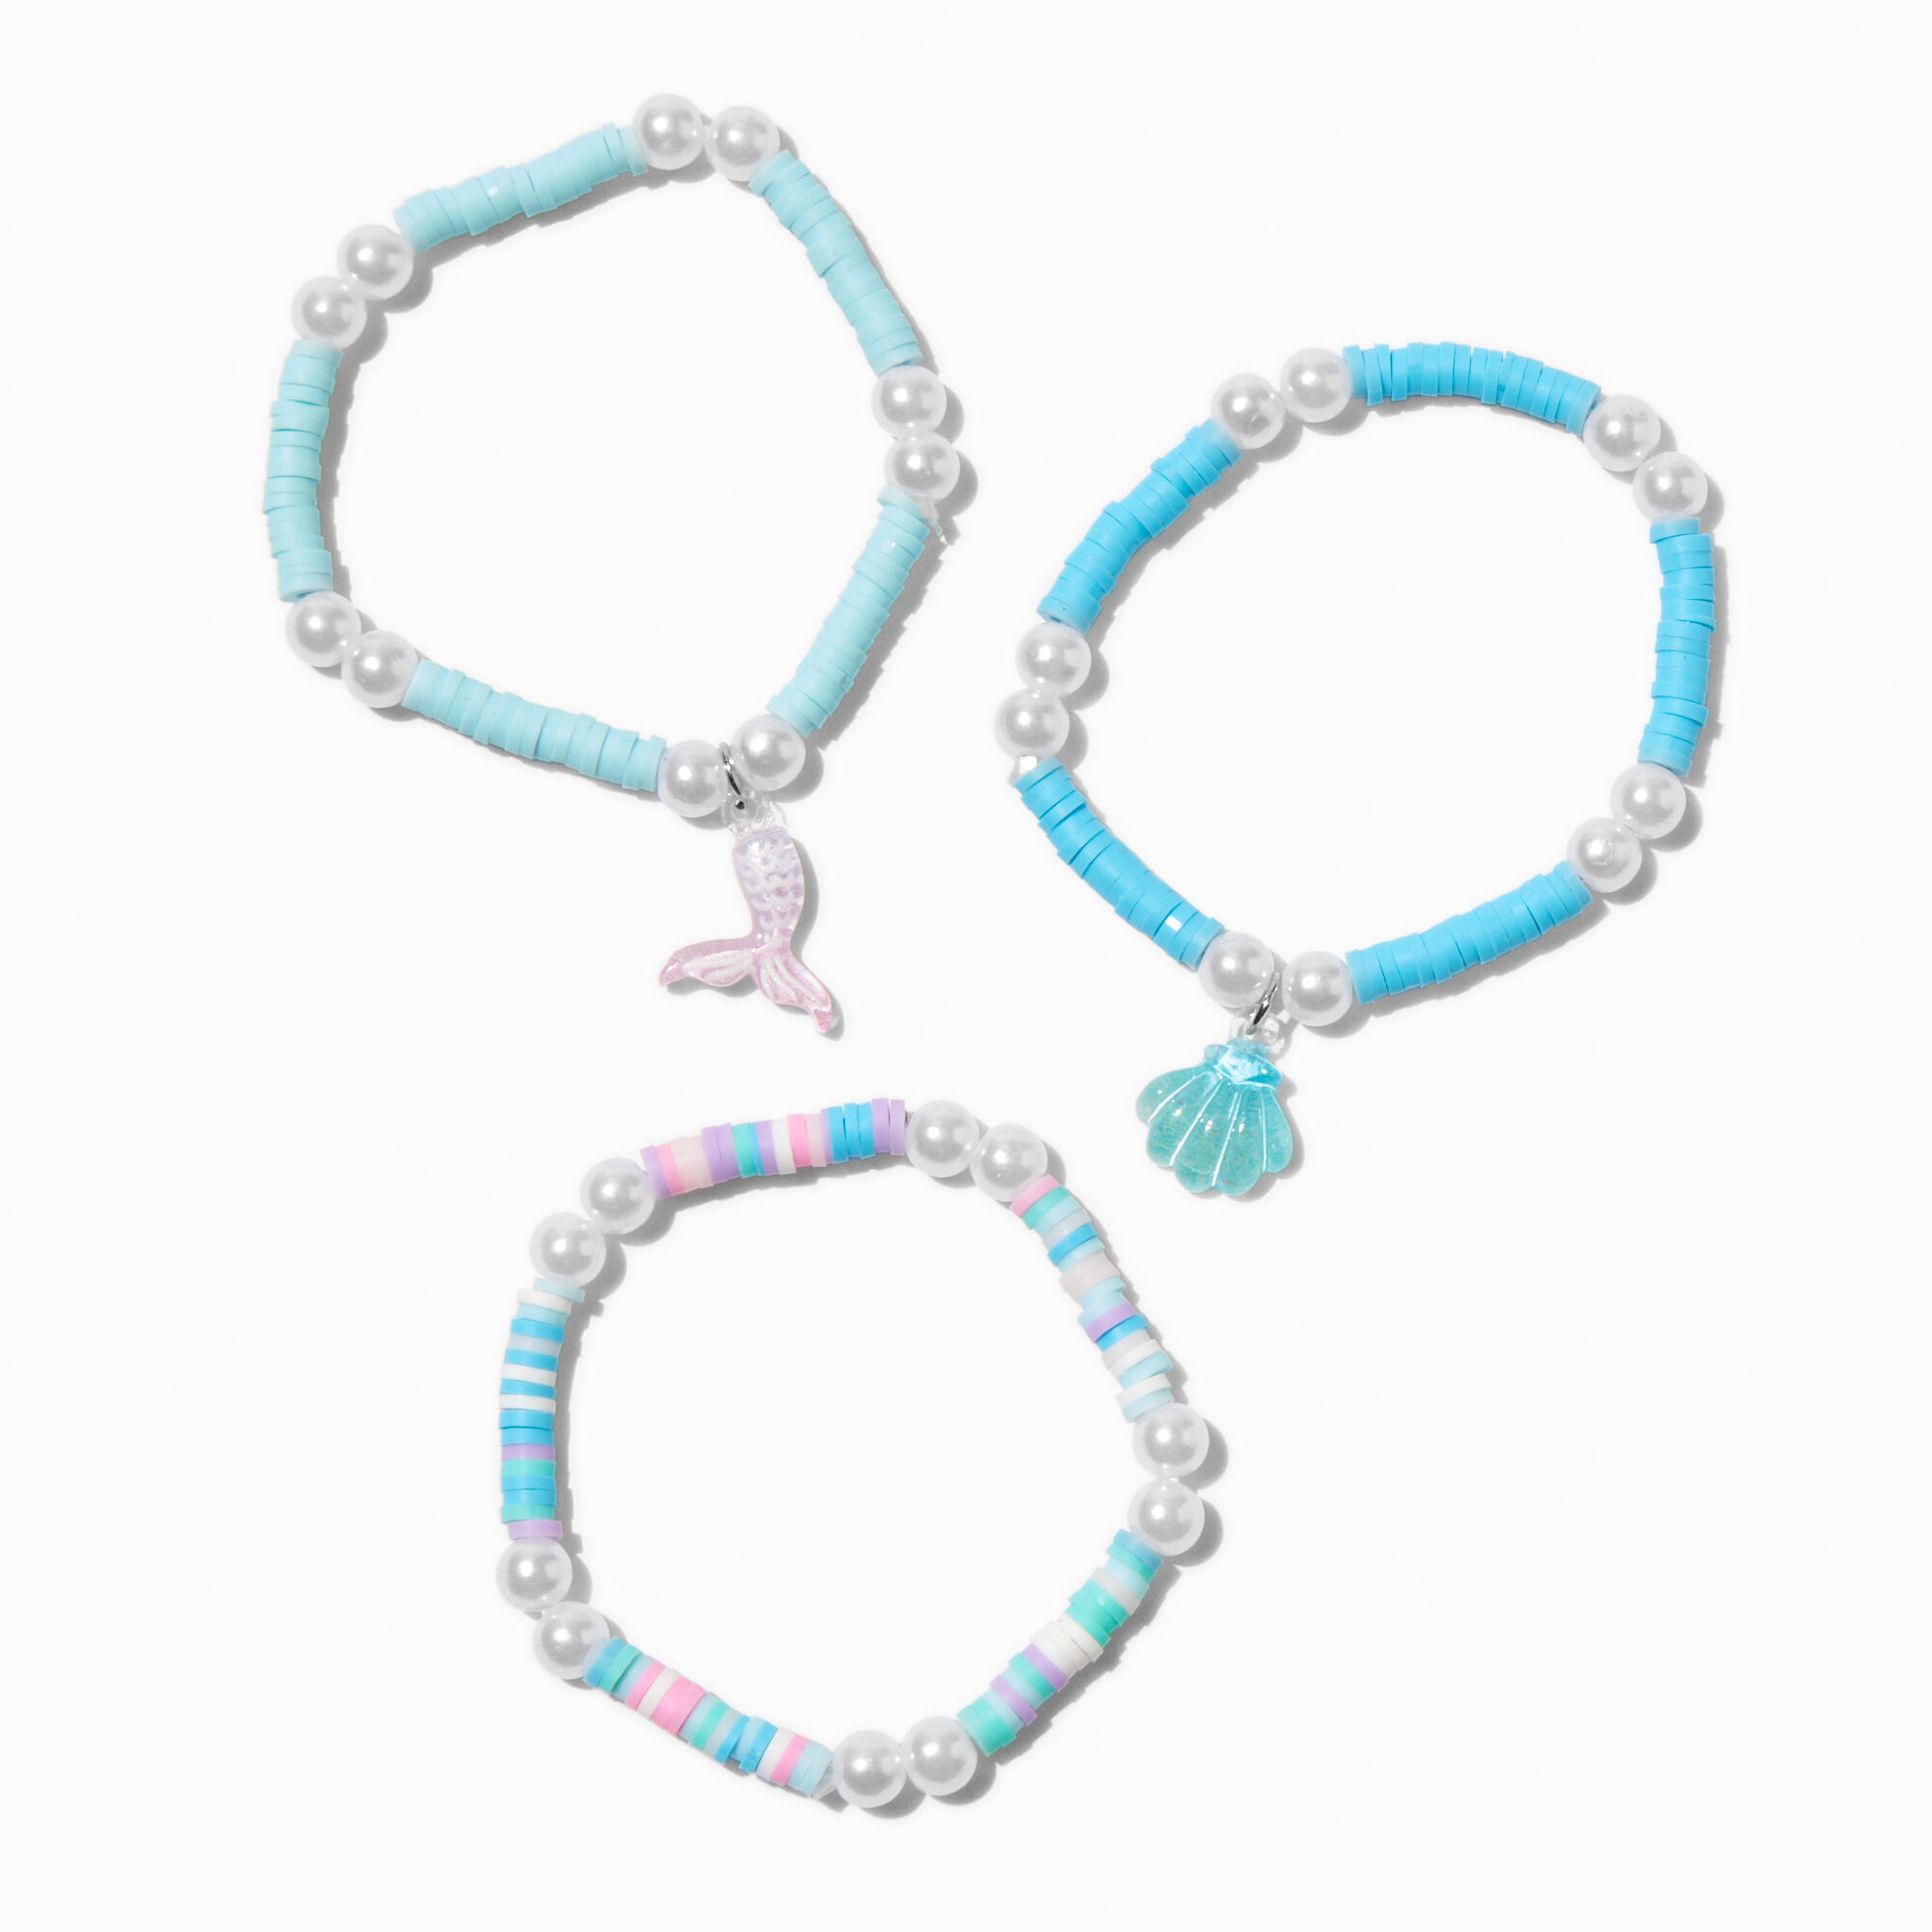 View Claires Club Mermaid Disc Bead Stretch Bracelets 3 Pack information